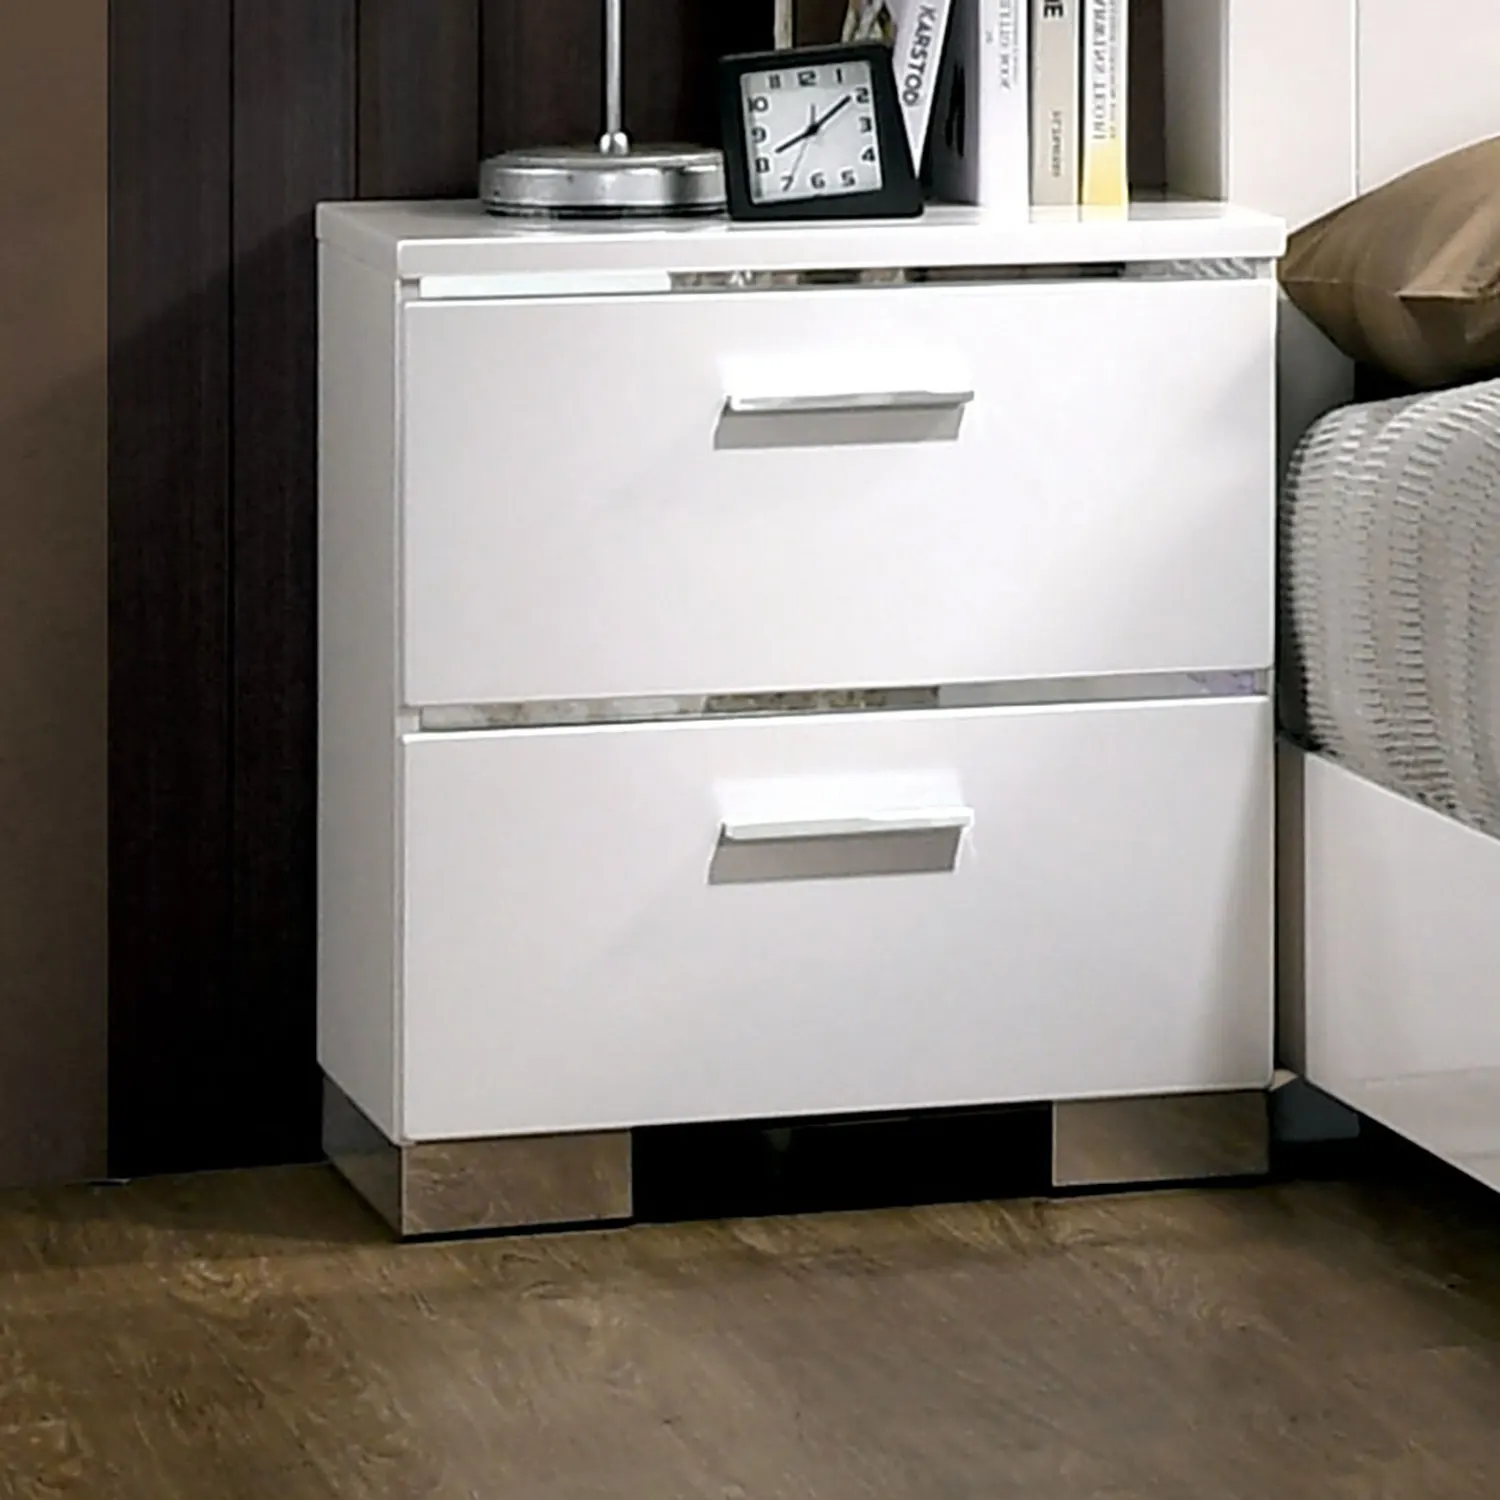 

Contemporary White 1pc Nightstand with High Gloss Lacquer Coating, Chrome Handles and Feet, USB Charger - Stylish Bedroom Furnit